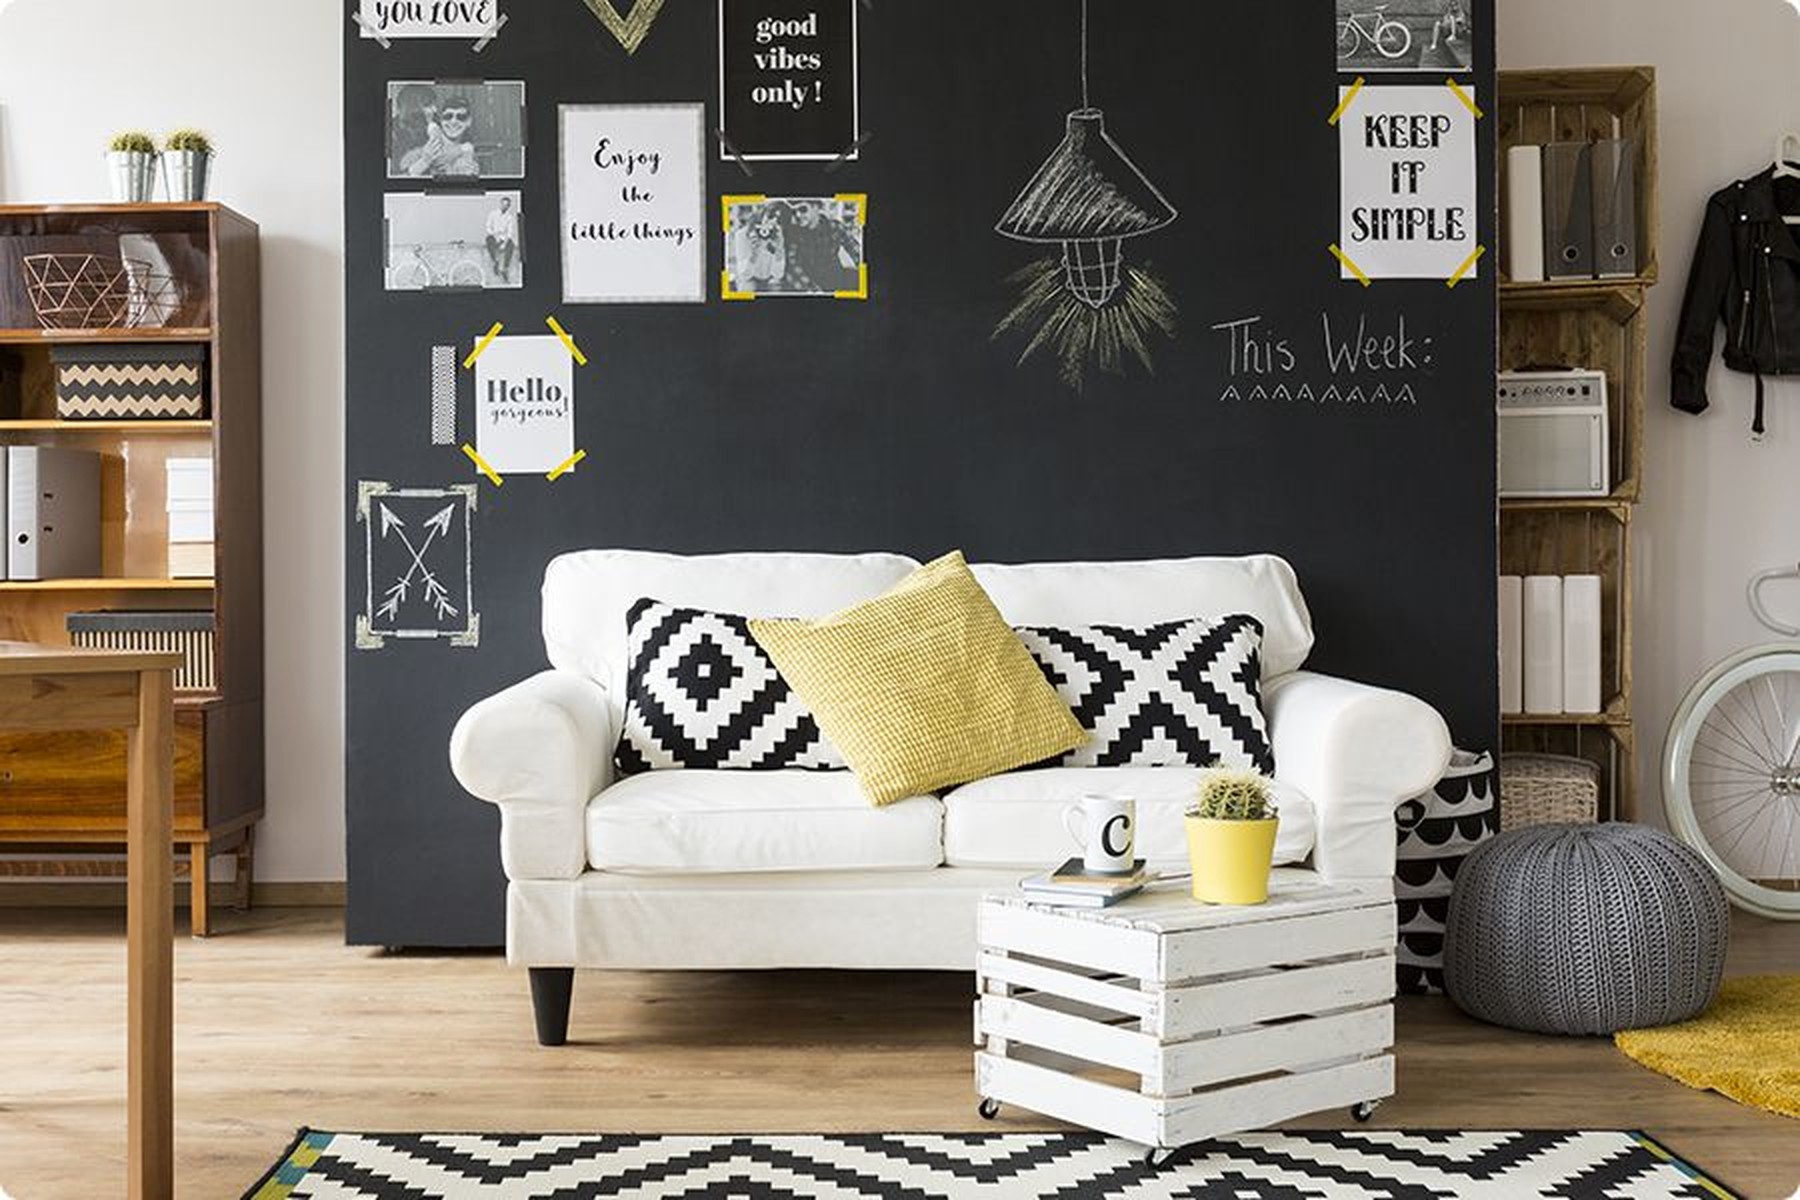 Decorate your walls for less with I Want Wallpaper